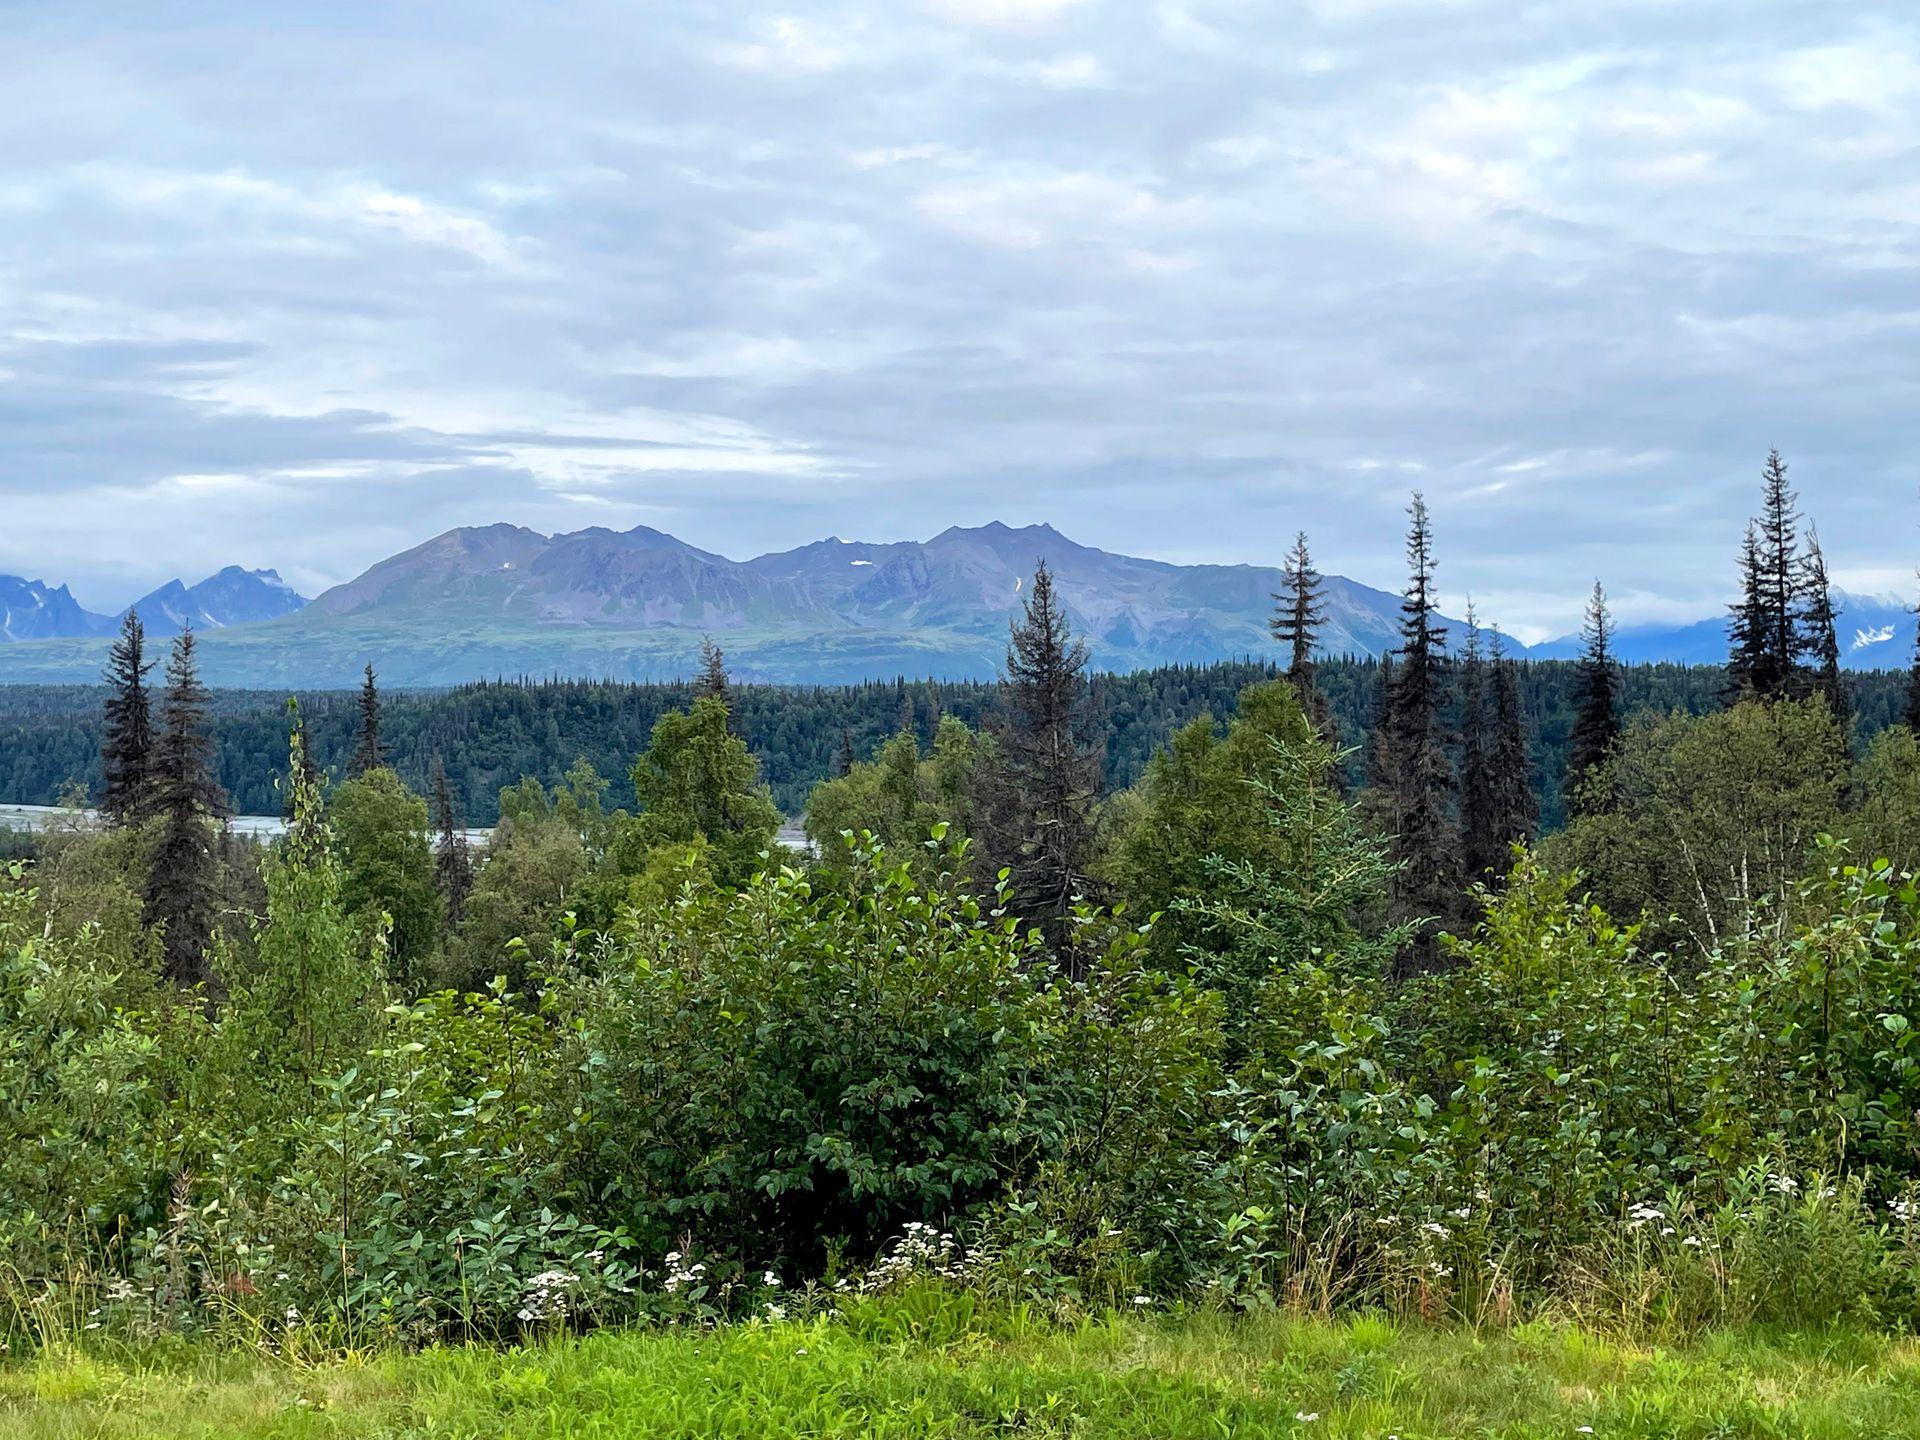 A view of the Denali Mountain Range with some trees in the foreground.